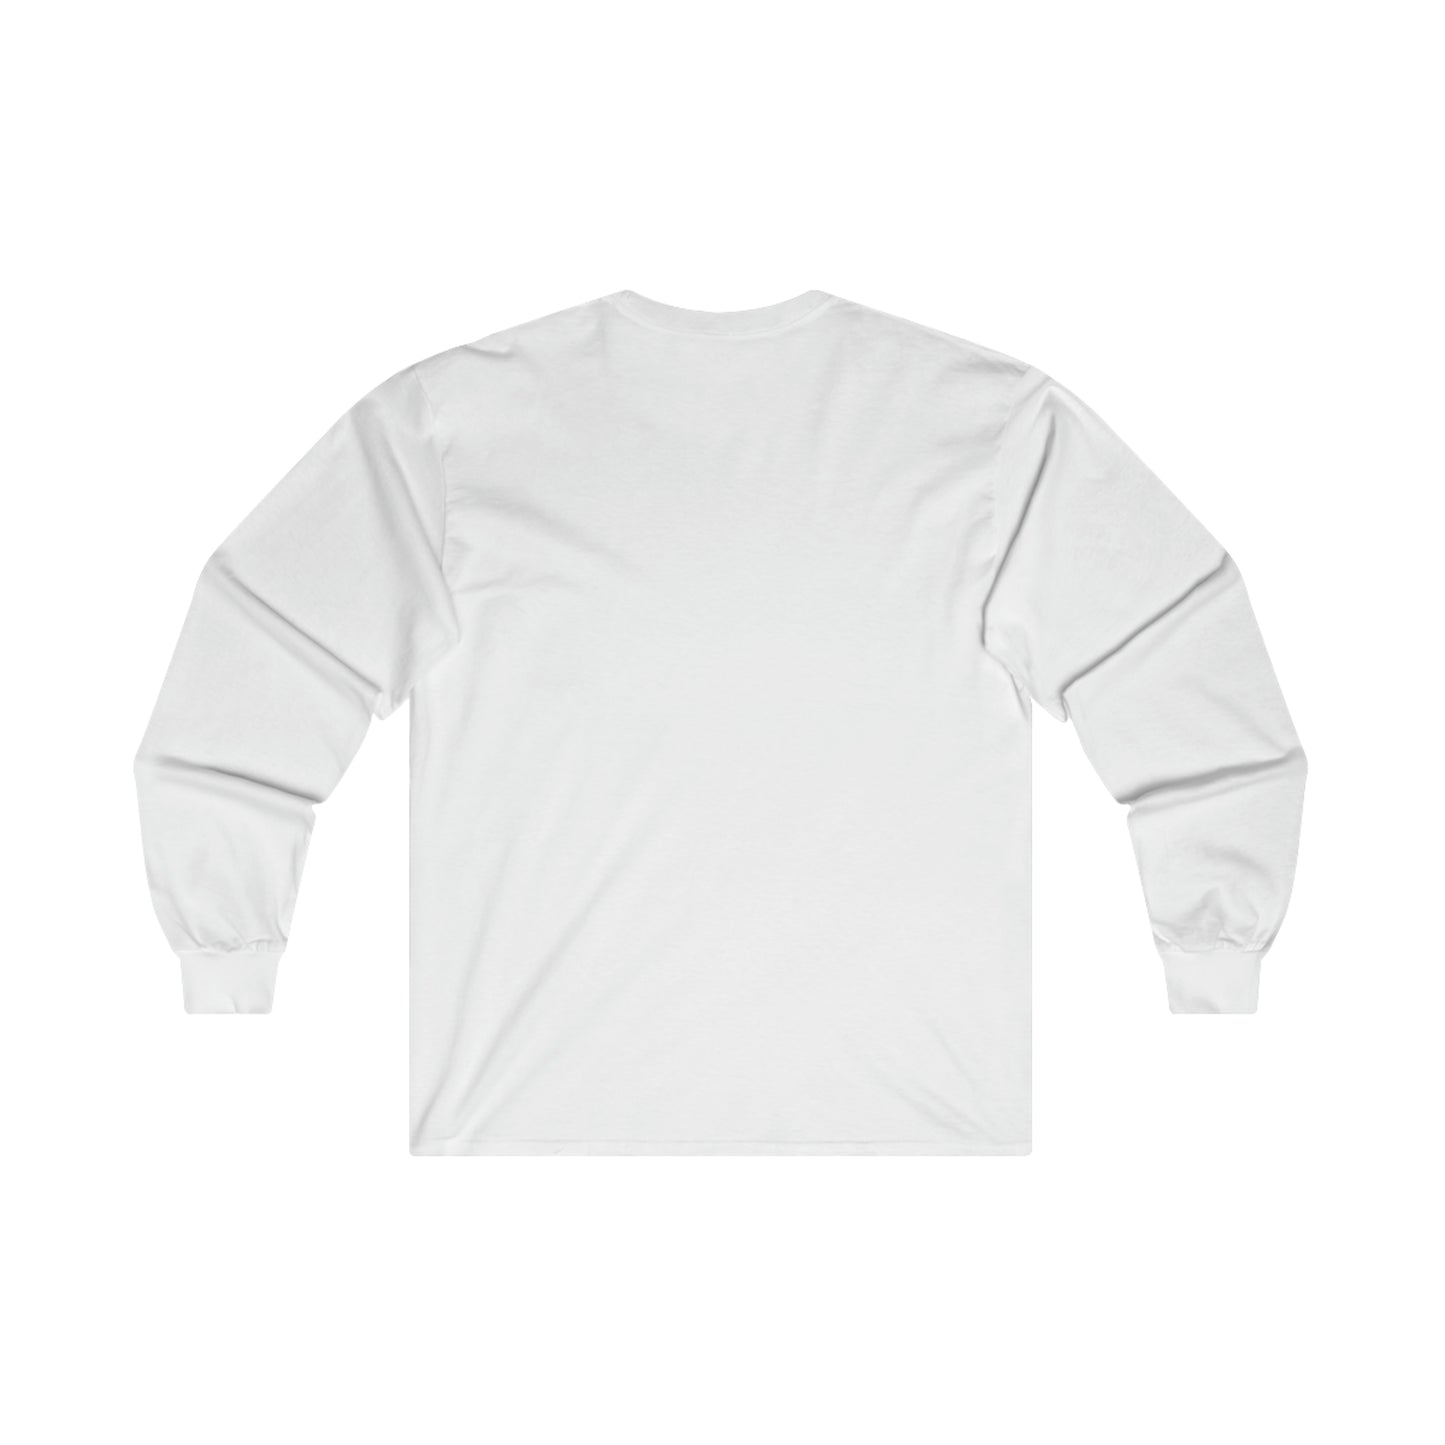 SAFEty Pin Long Sleeve Tee